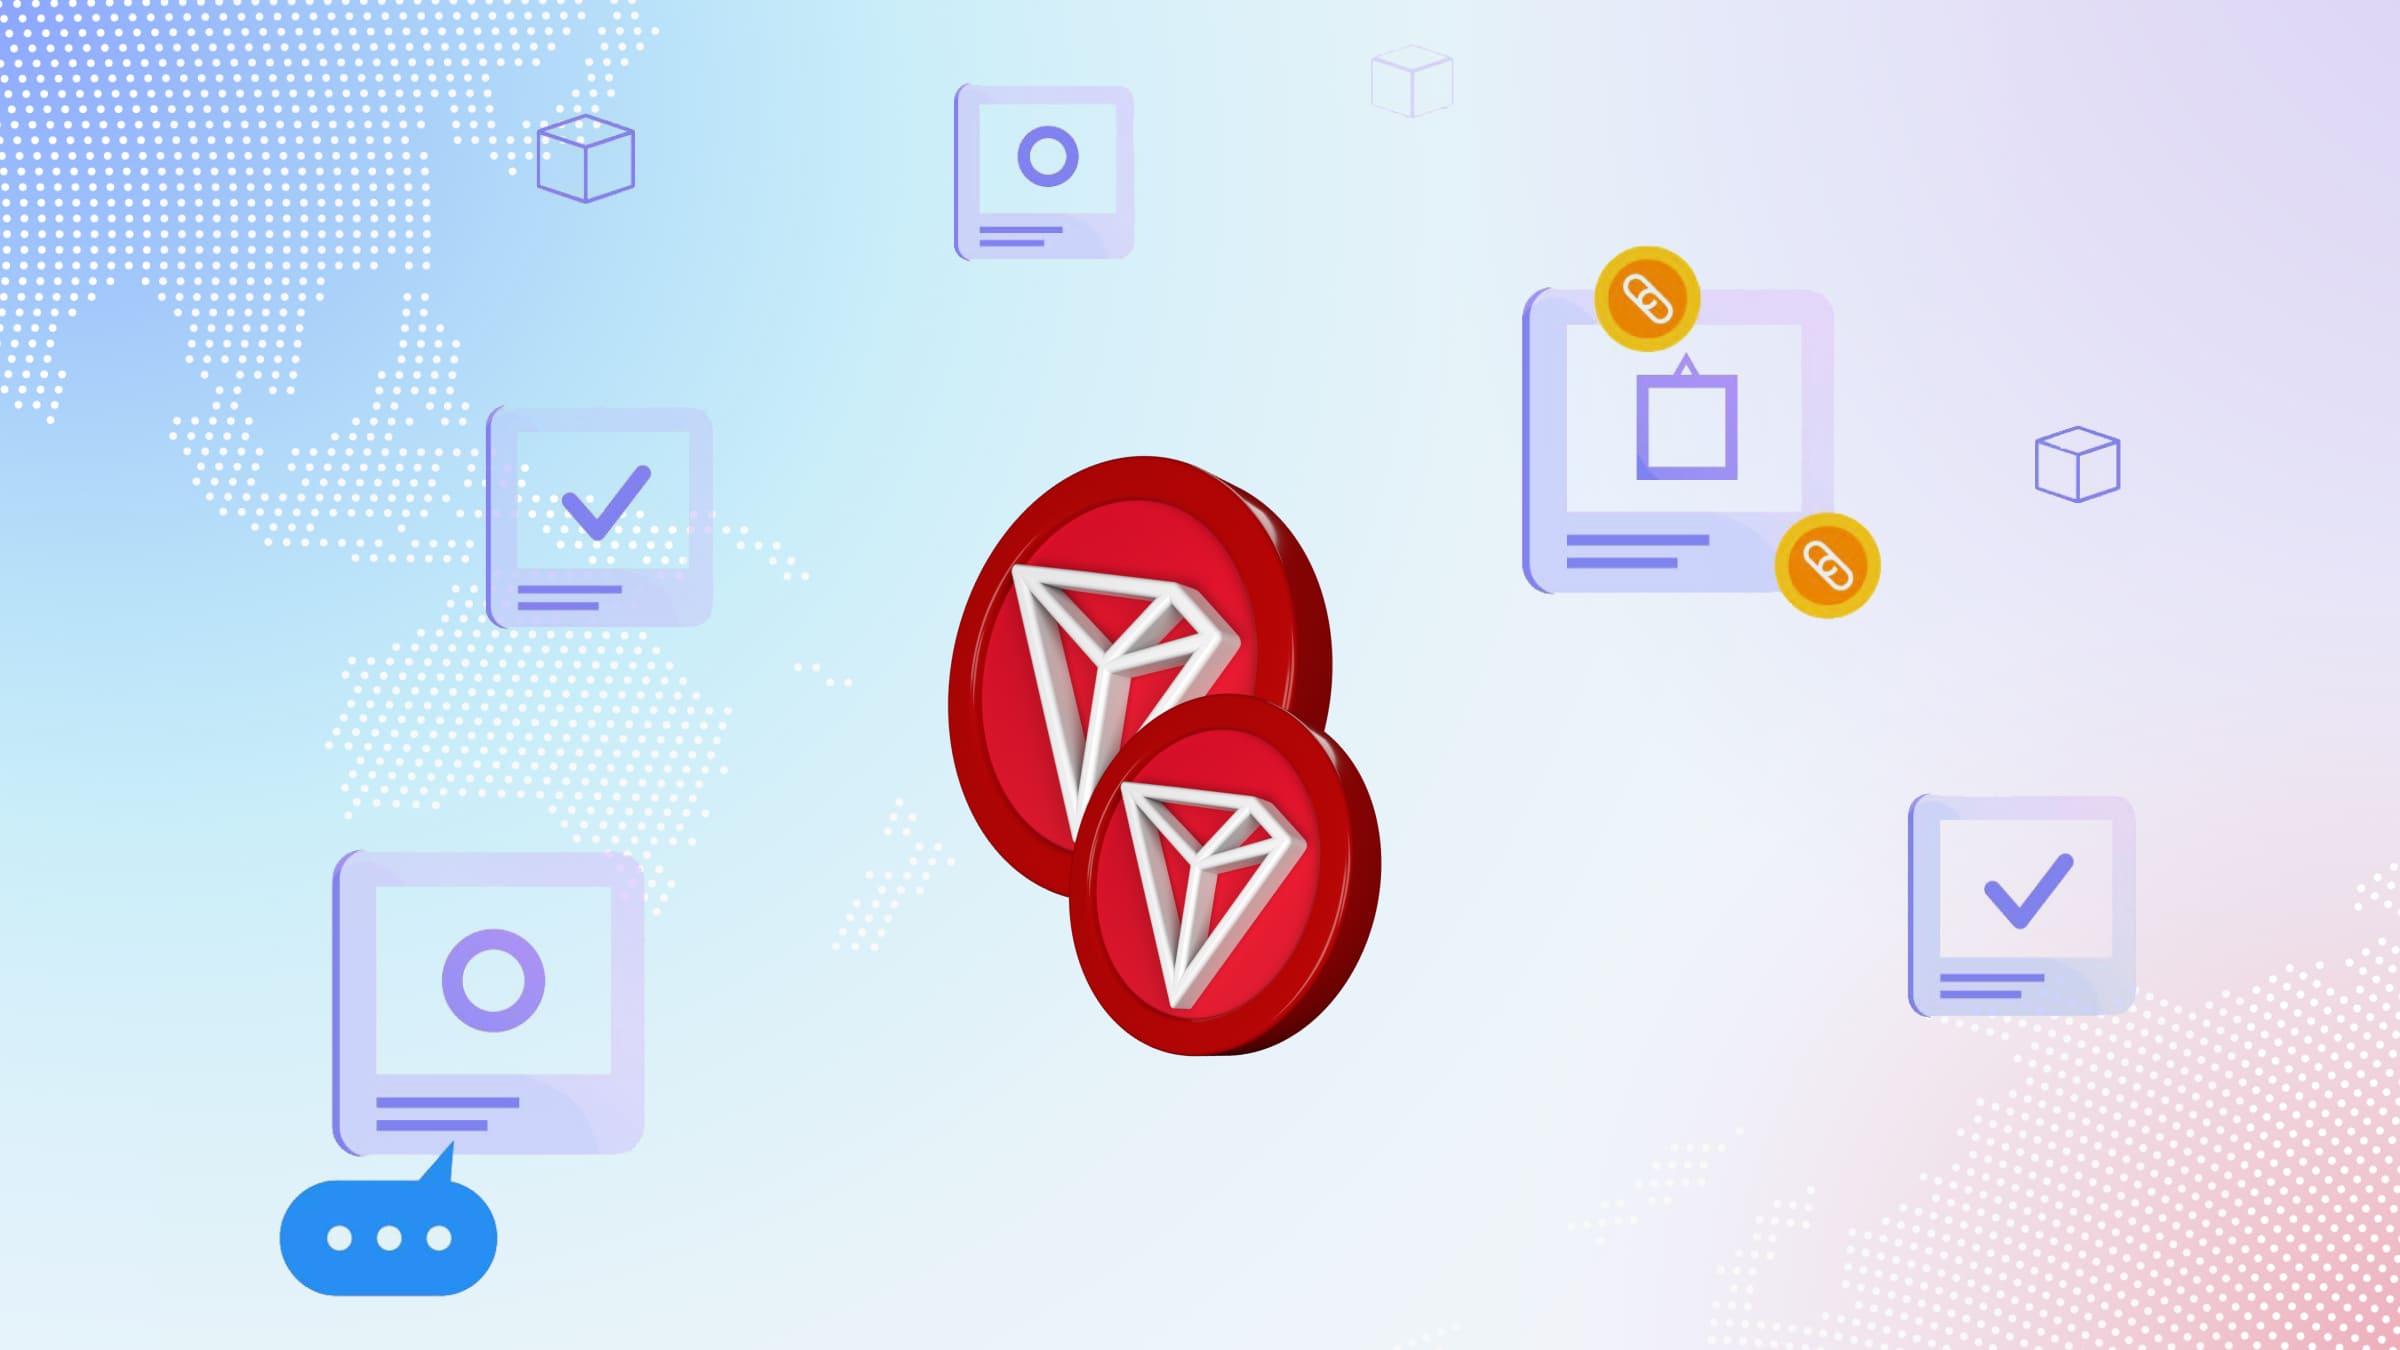 TRON is a blockchain platform that was launched in 2017.